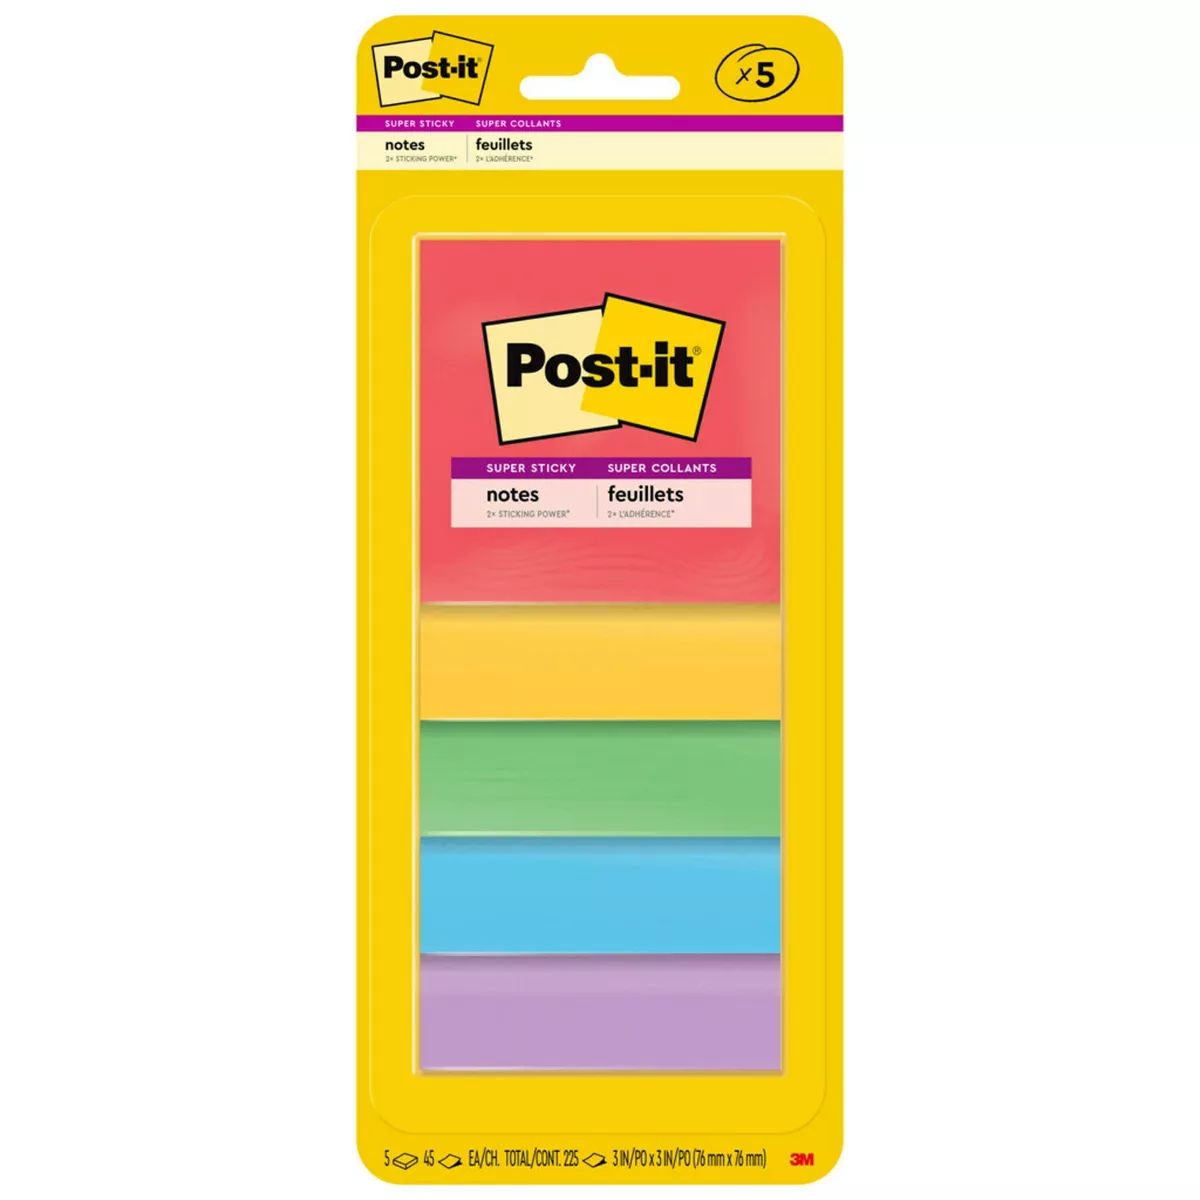 Post-it 5pk 3" x 3" Super Sticky Notes 45 Sheets/Pad - Marrakesh Collection | Target